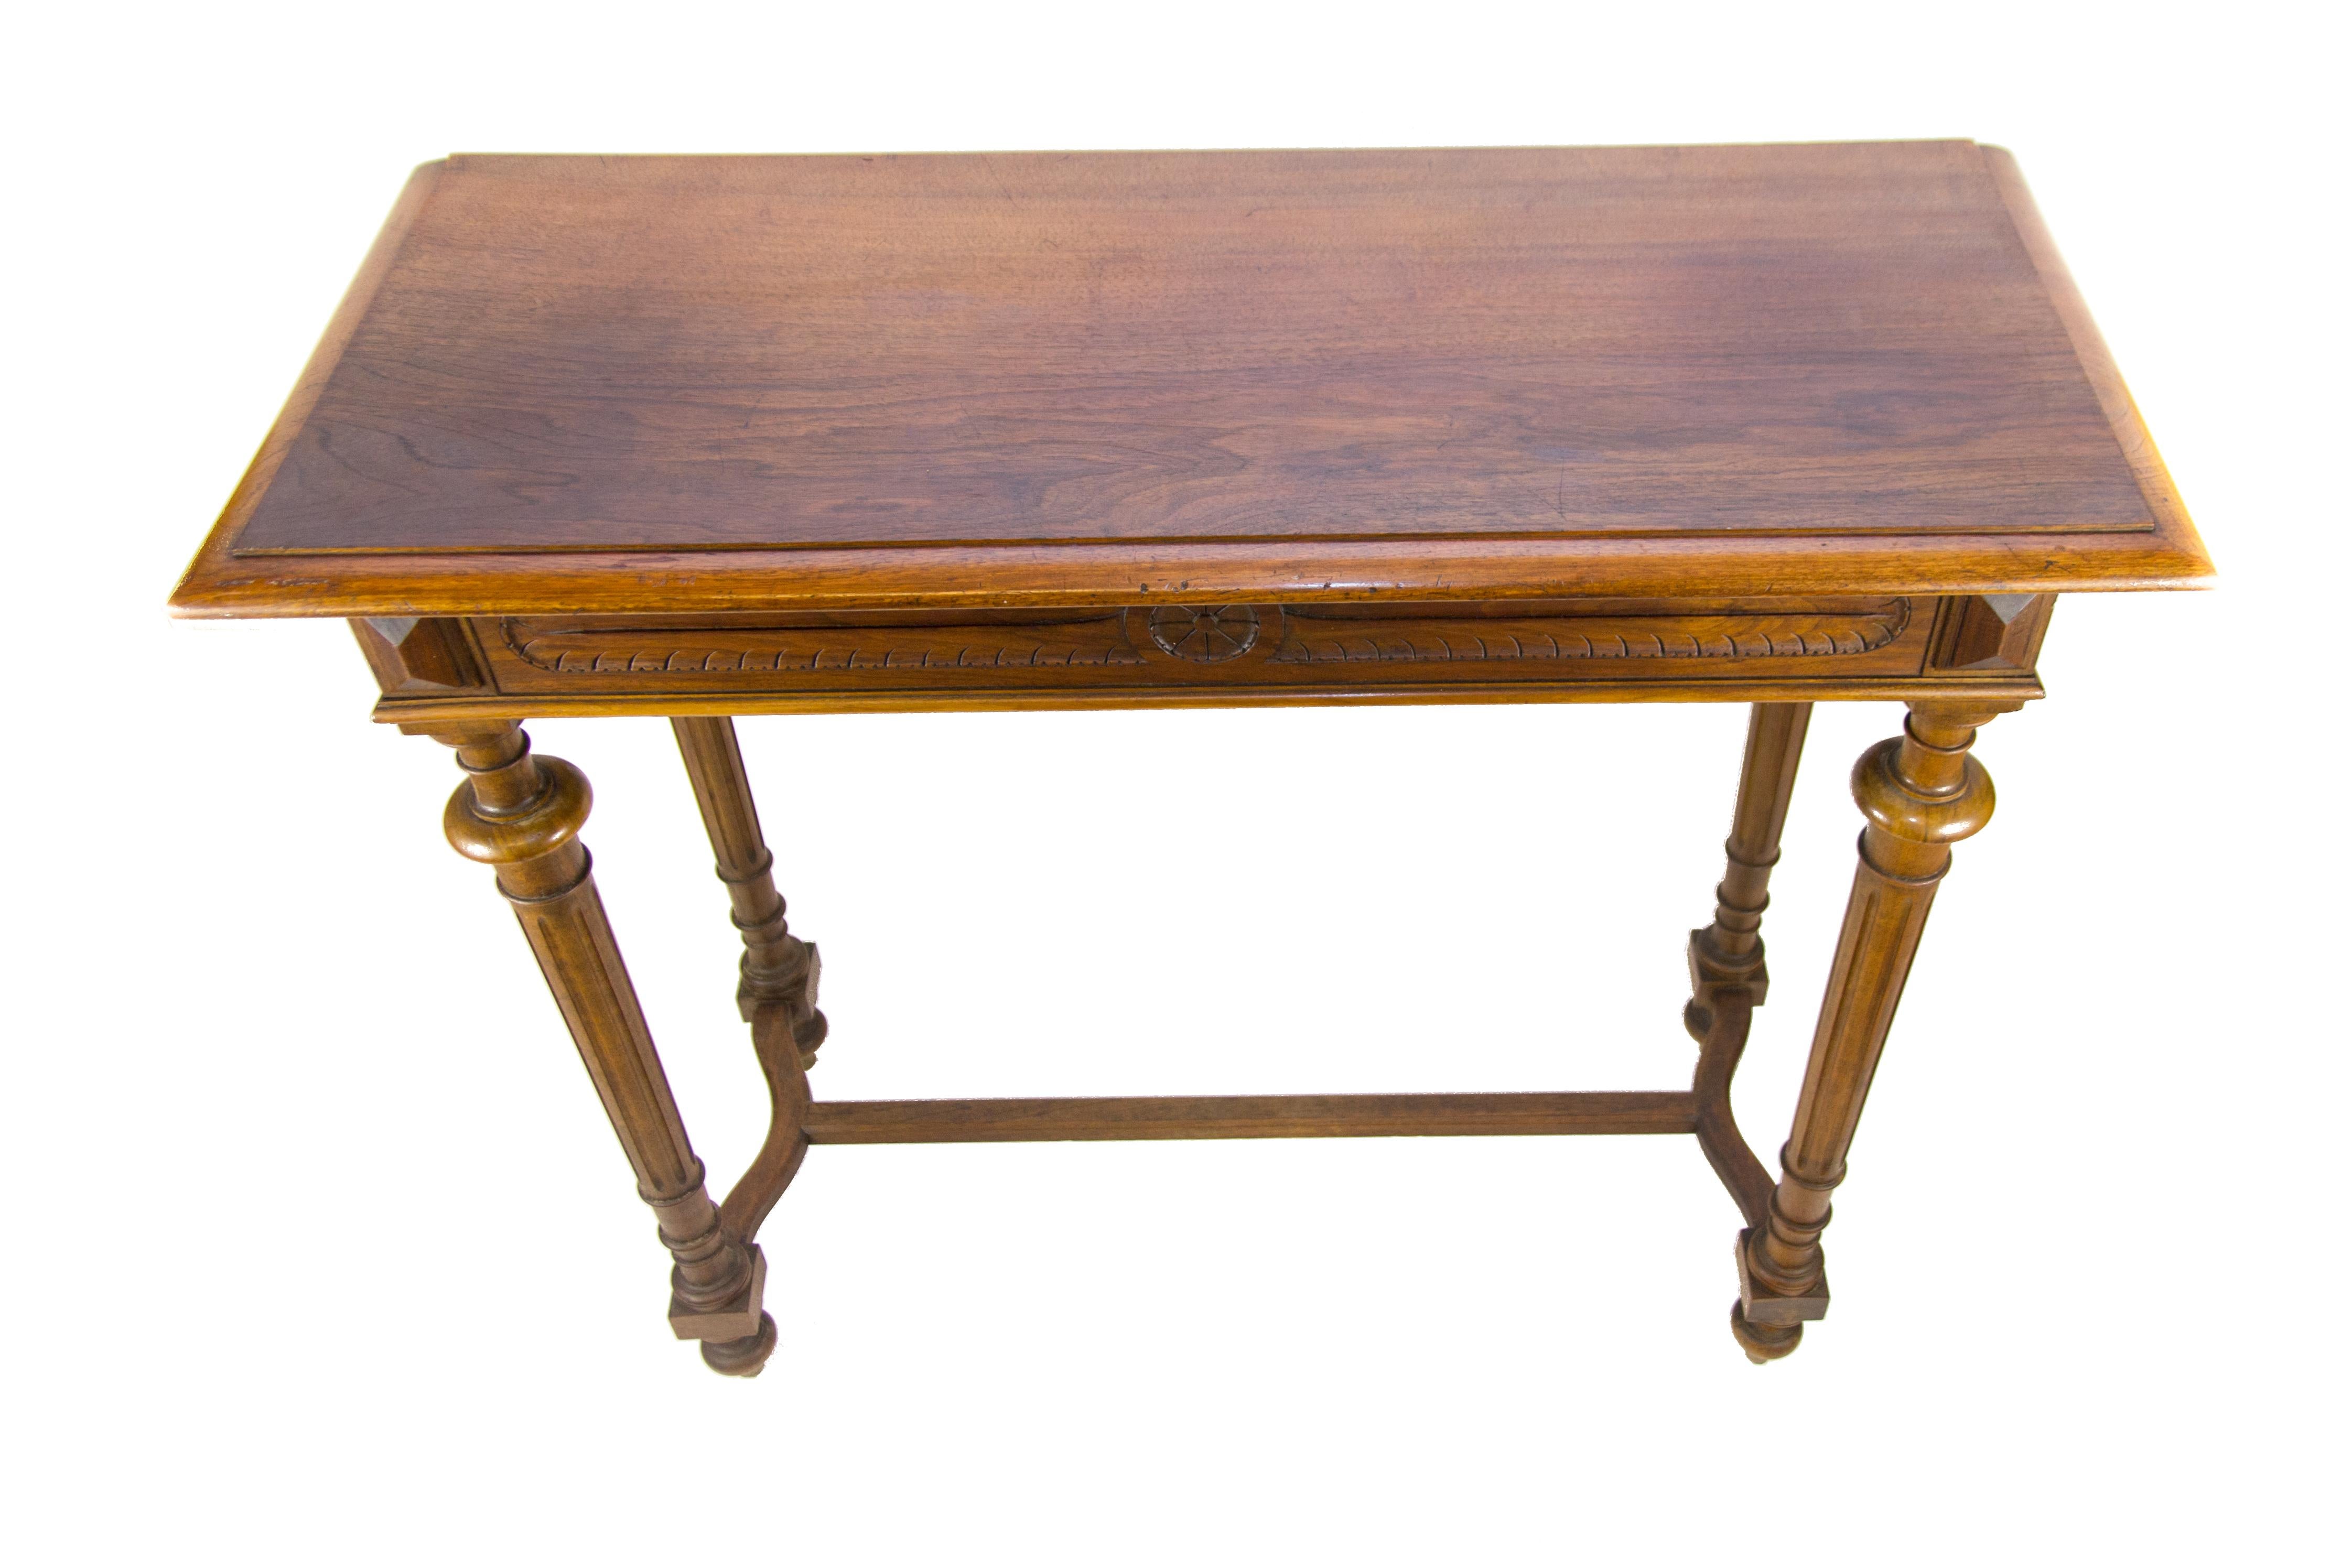 This elegant Louis XVI style console table is made of walnut wood. The table is supported by four tapered, fluted and carved legs so it does not have to be attached to the wall and can be used as a narrow center or end table, circa 1920s
Measures: